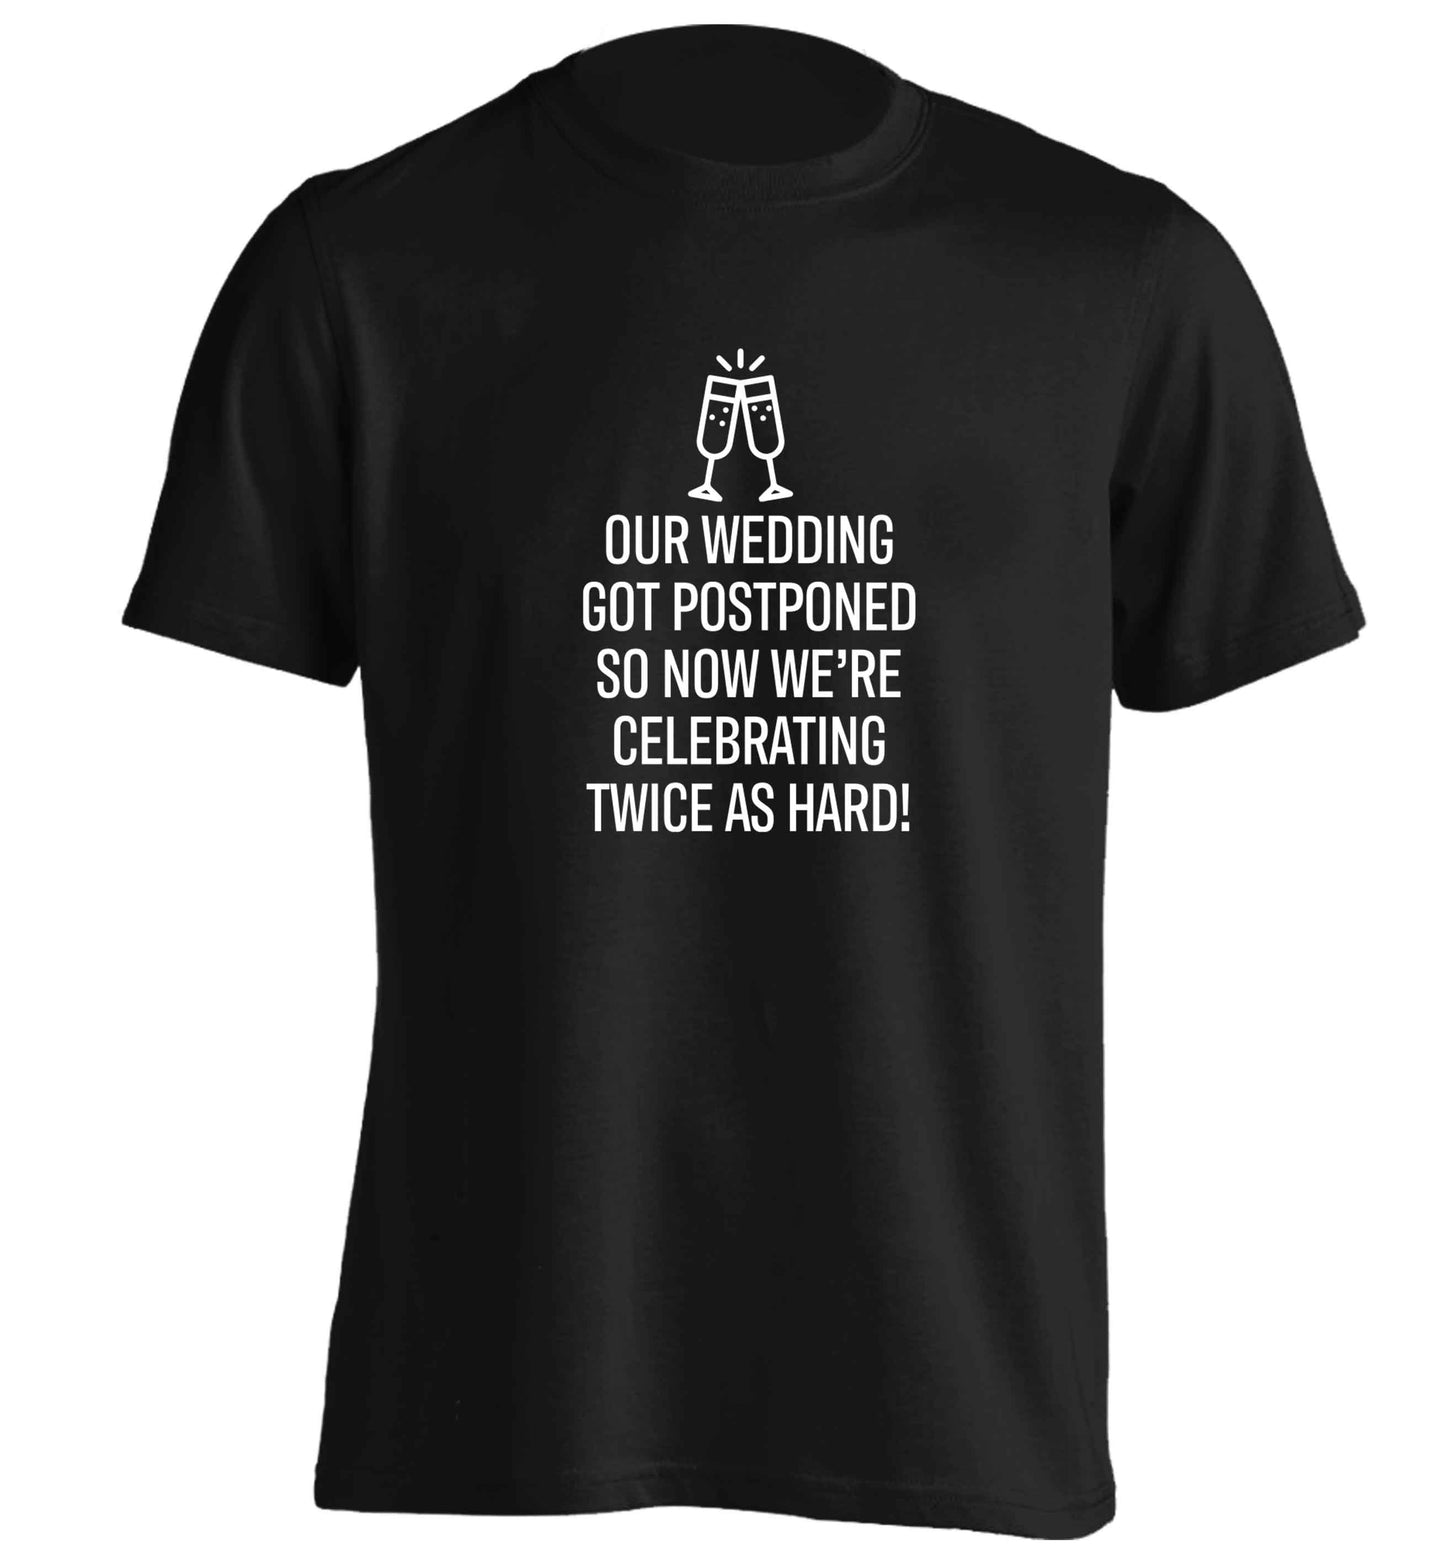 Postponed wedding? Sounds like an excuse to party twice as hard!  adults unisex black Tshirt 2XL